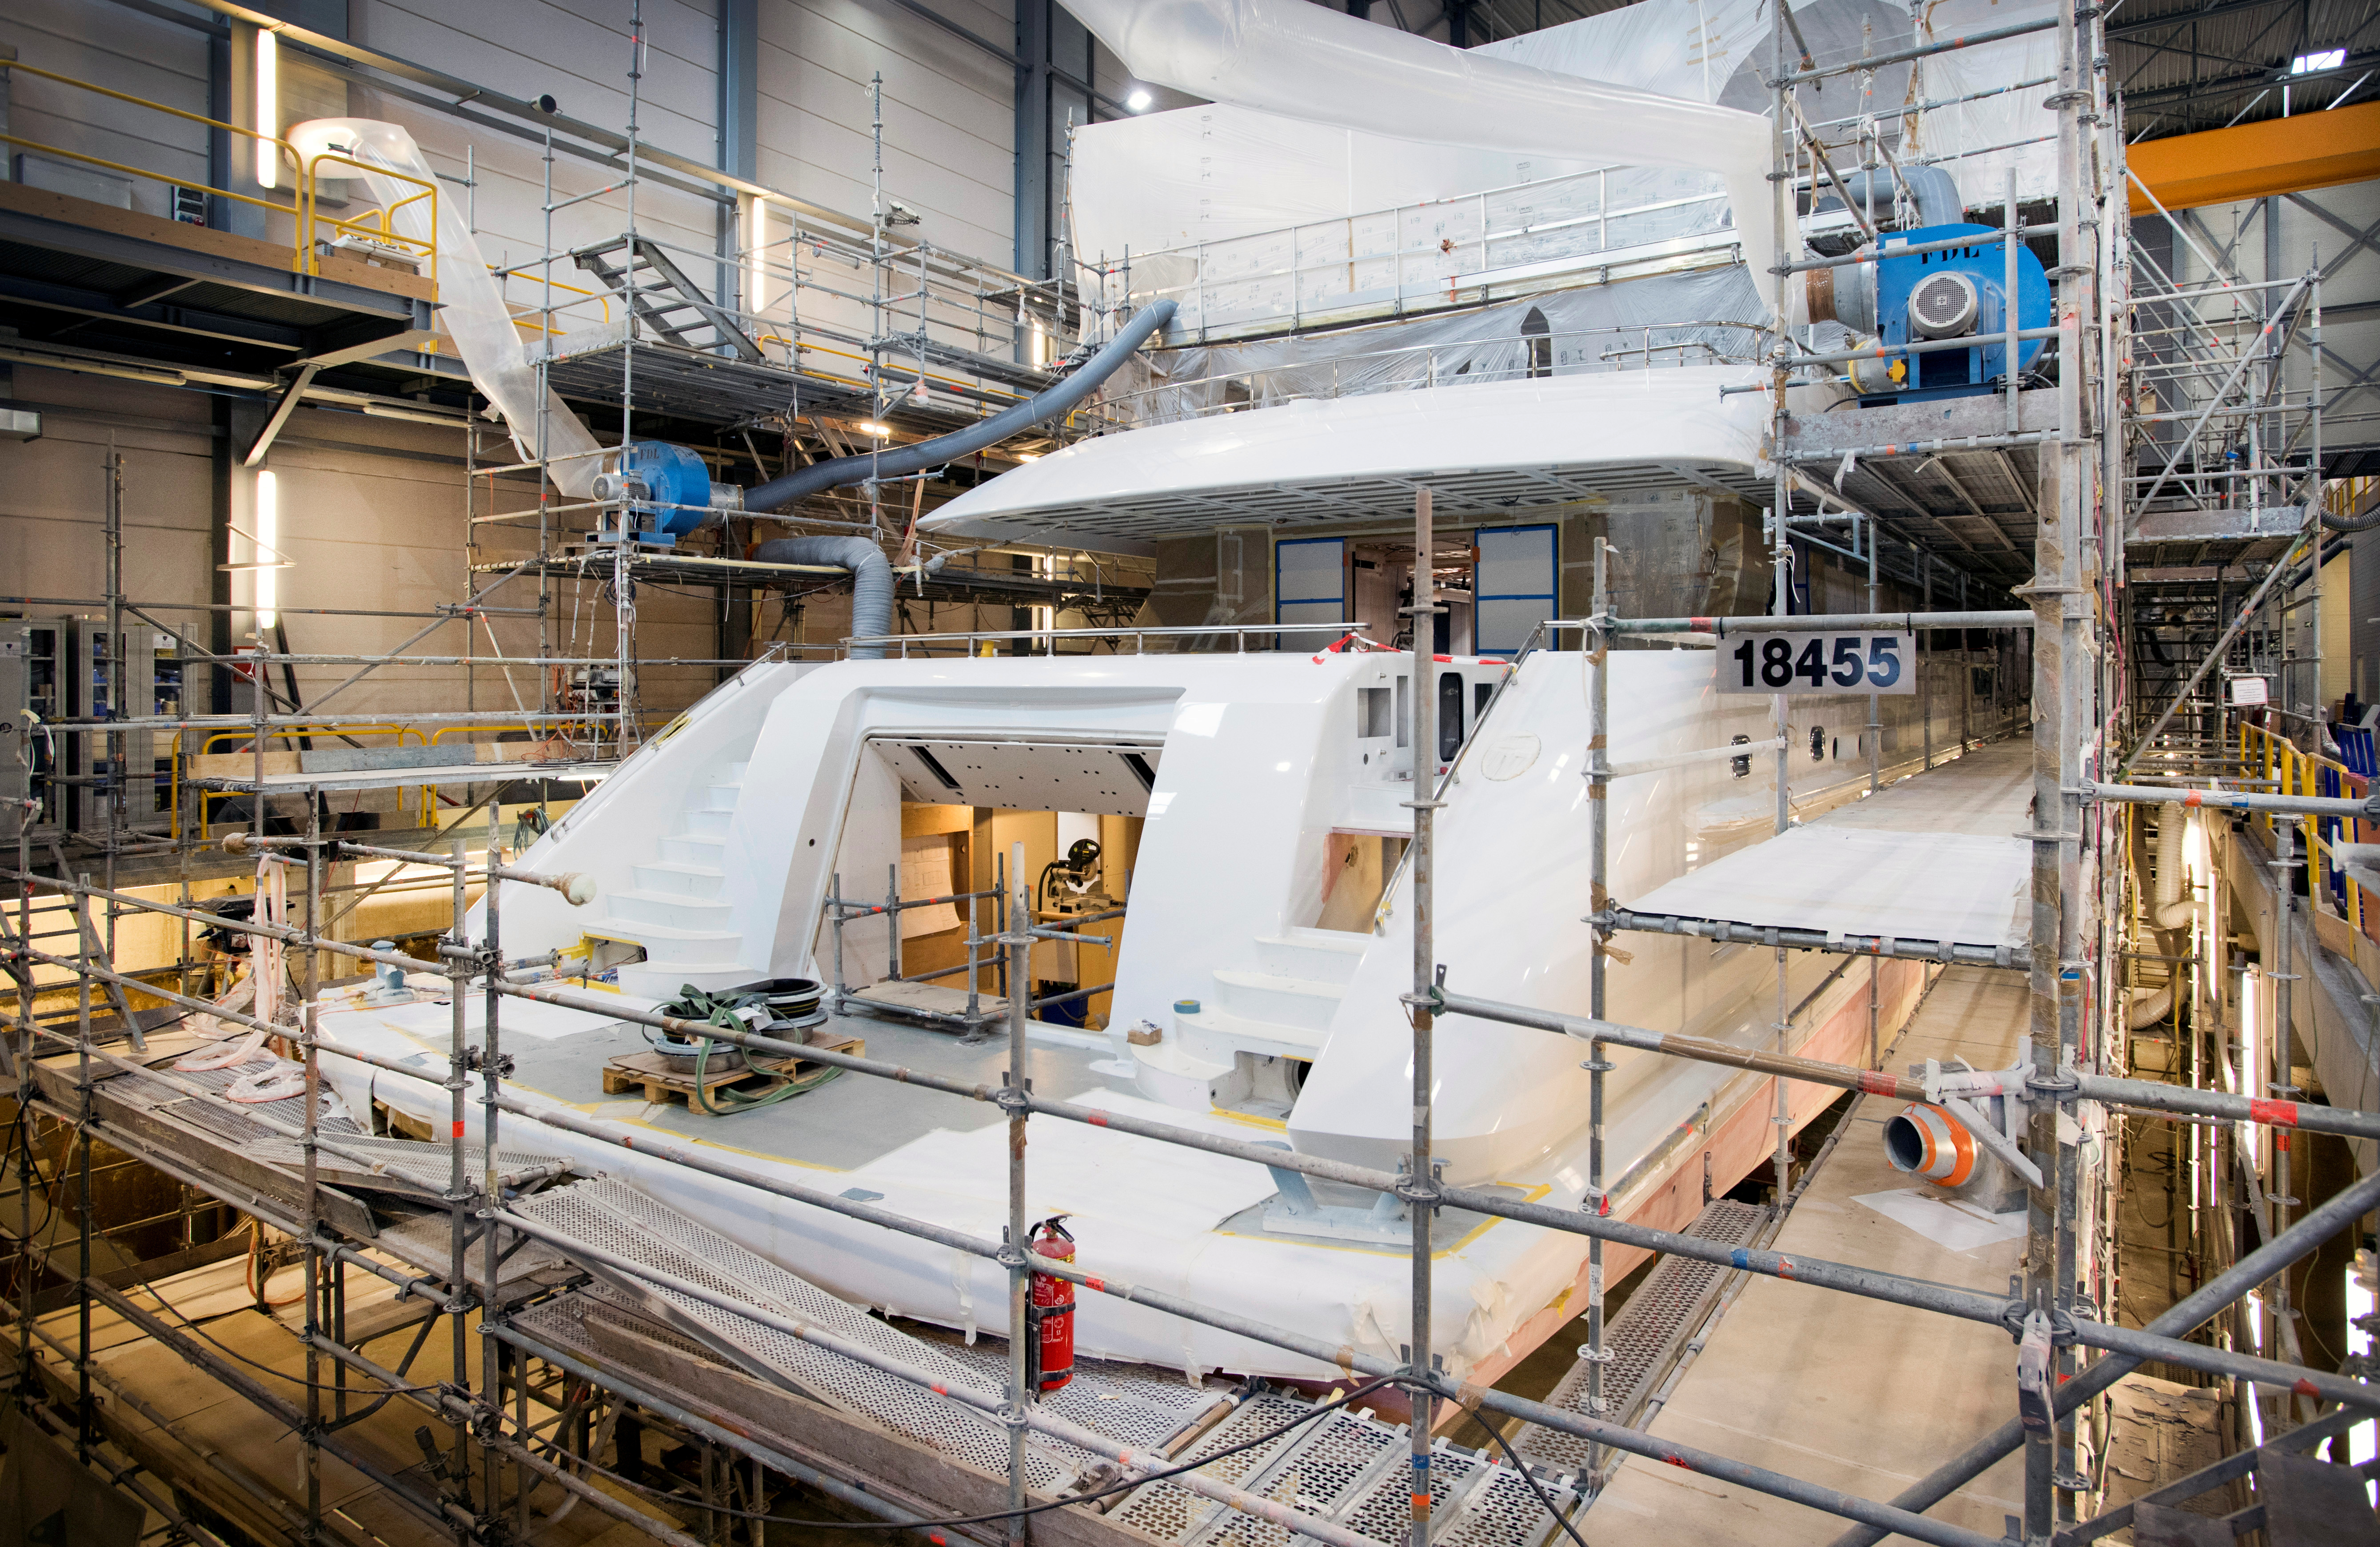 A yacht is seen under construction at the Heesen Yachts shipyard in Oss